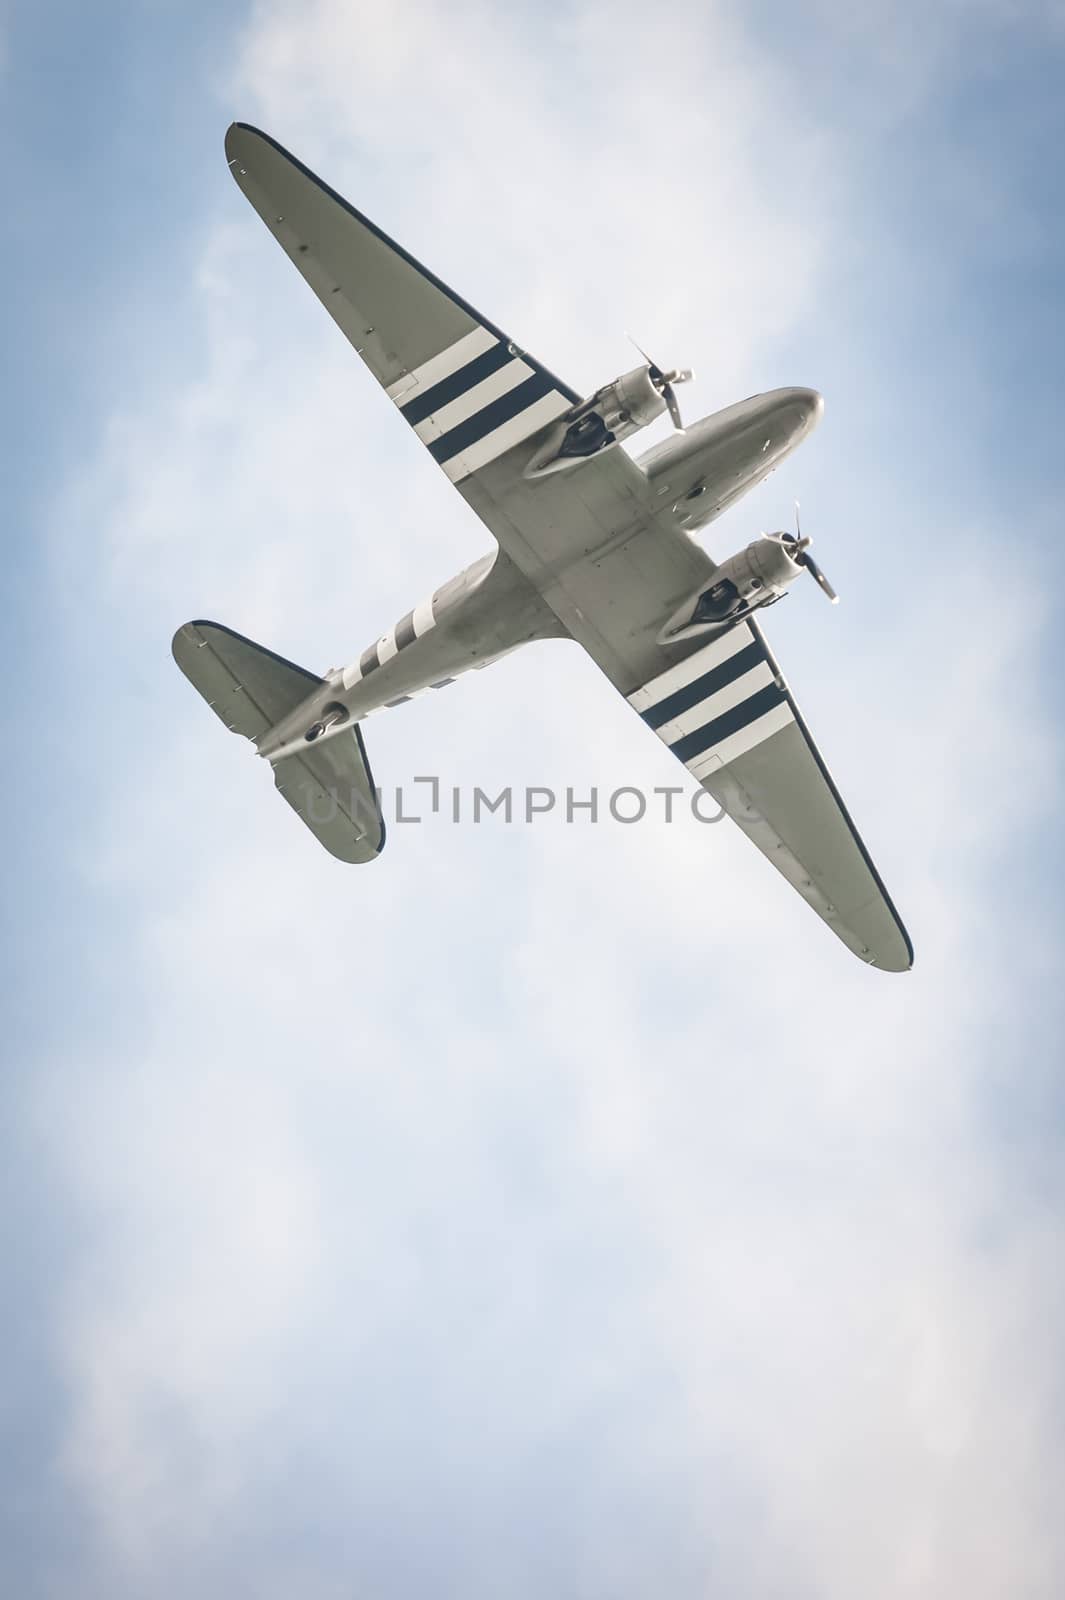 vintage transporter aircraft against a blue cloudy sky